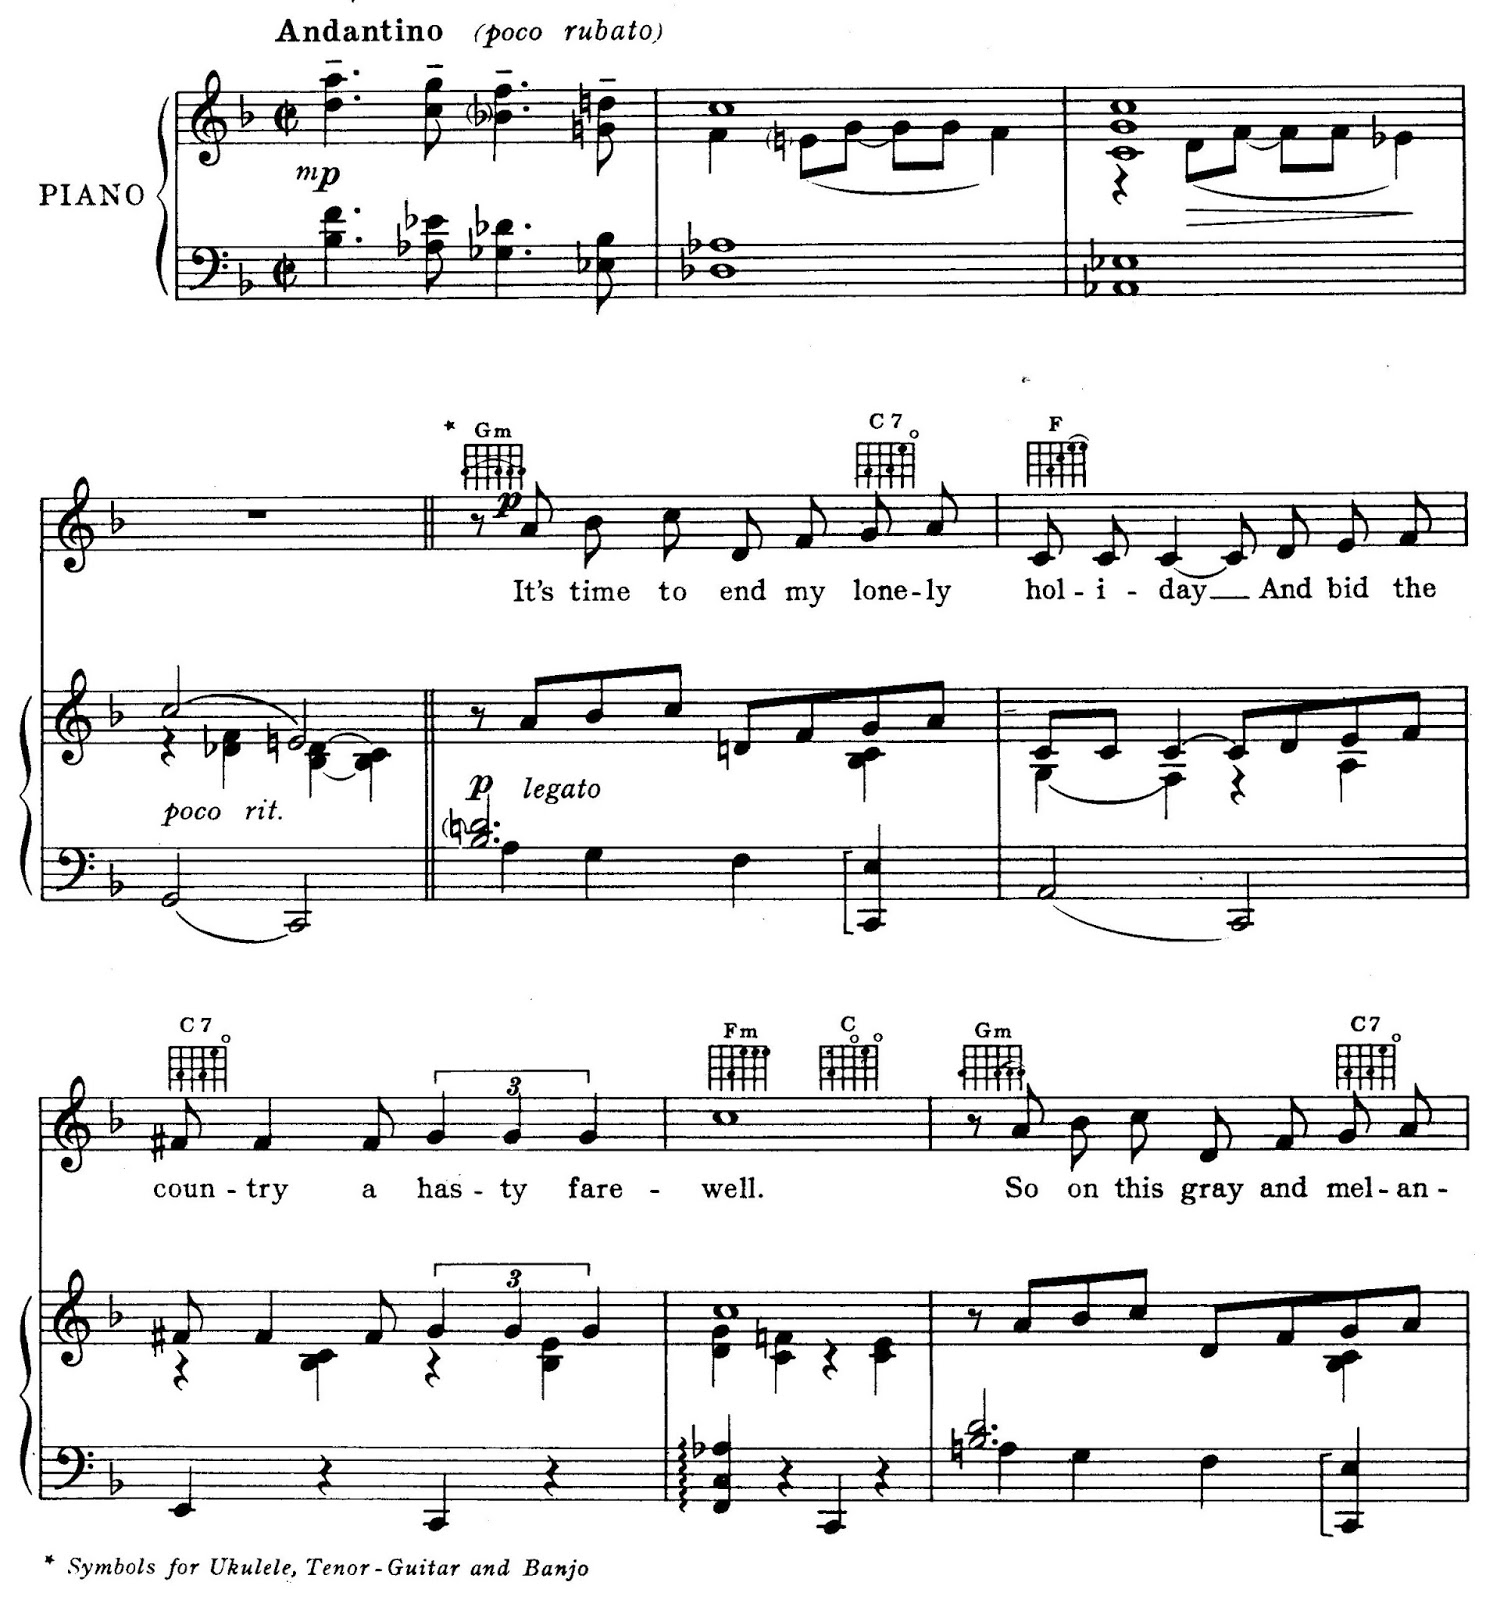 Jazz Fusion Play Along SCORE - You Lead The Band! FREE – GMI - Guitar and  Music Institute Online Shop